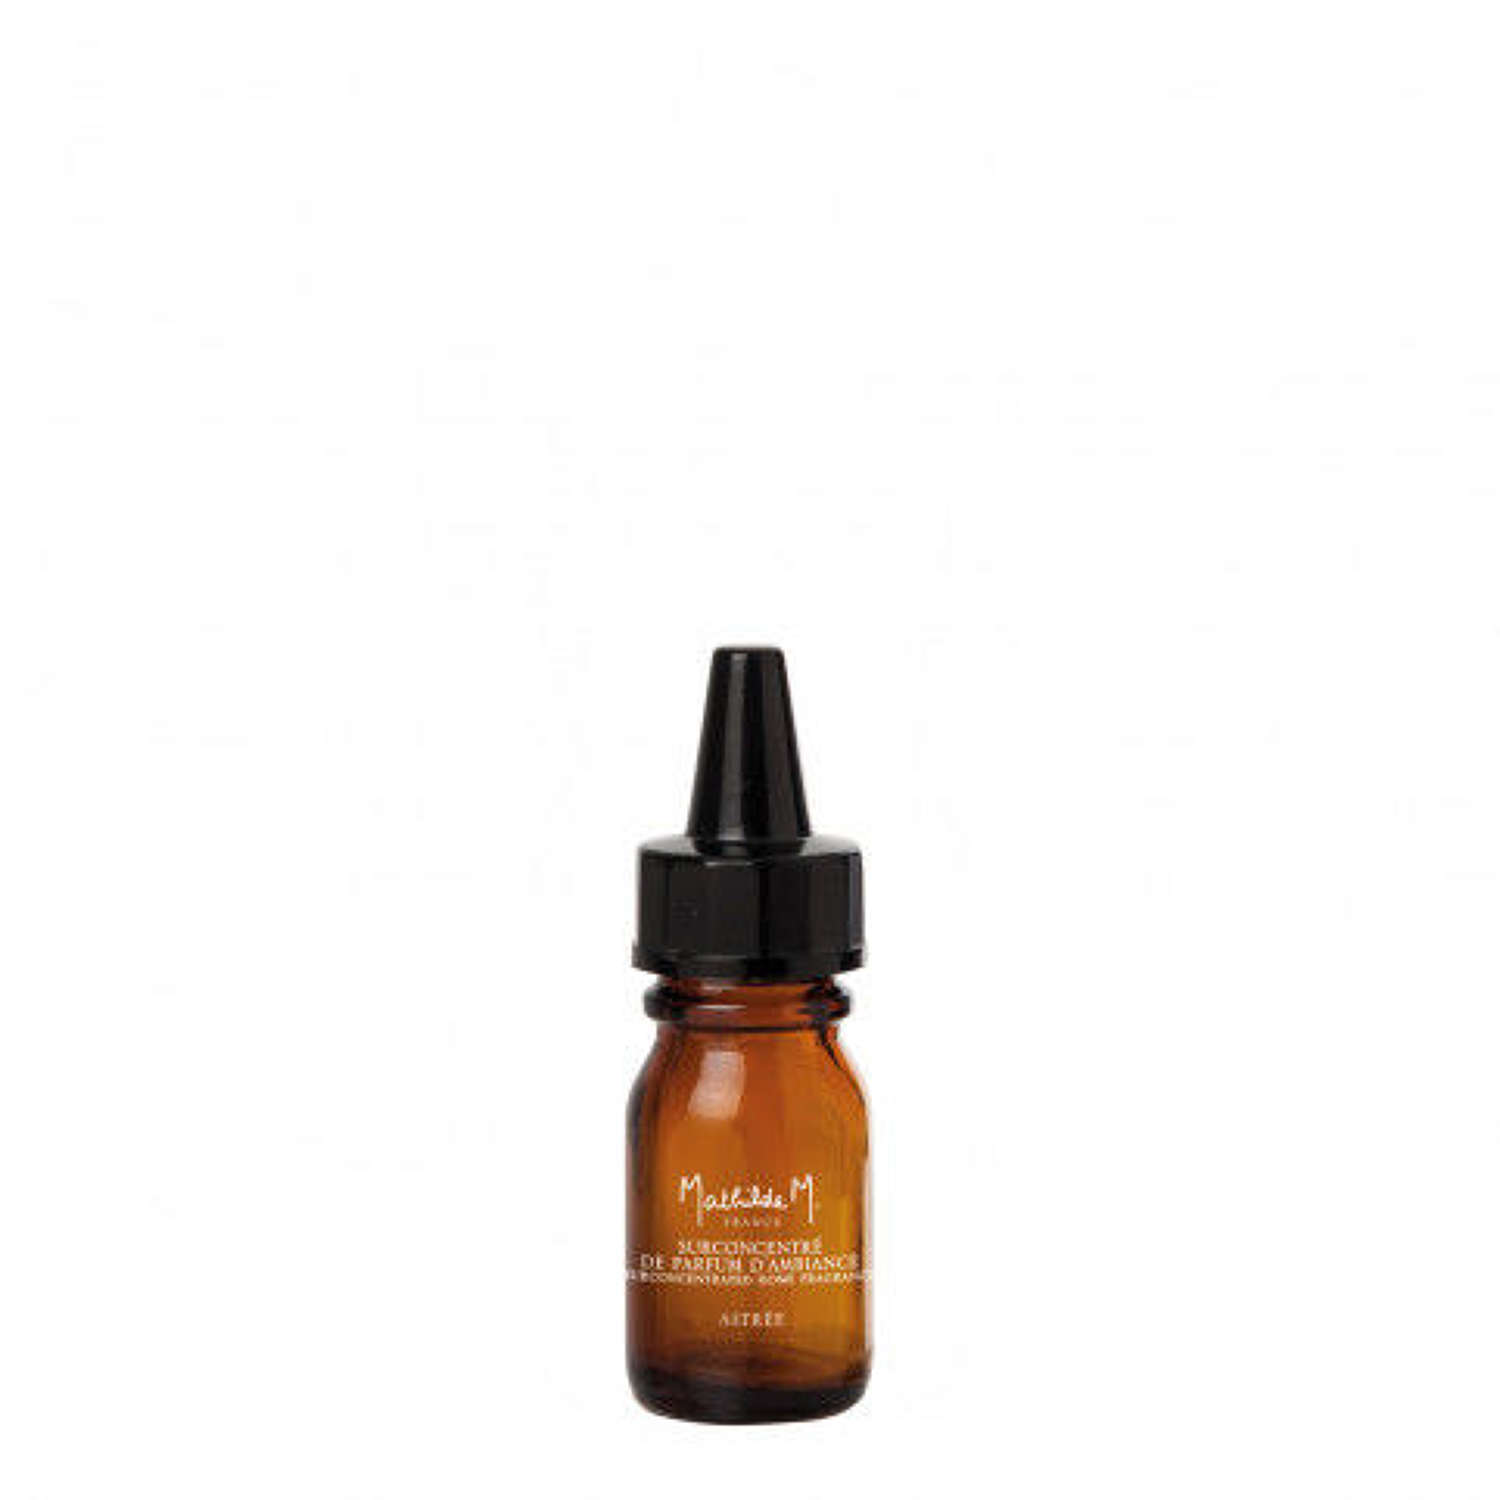 Mathilde M. France - Astree Superconcentrated Oil - 10ml